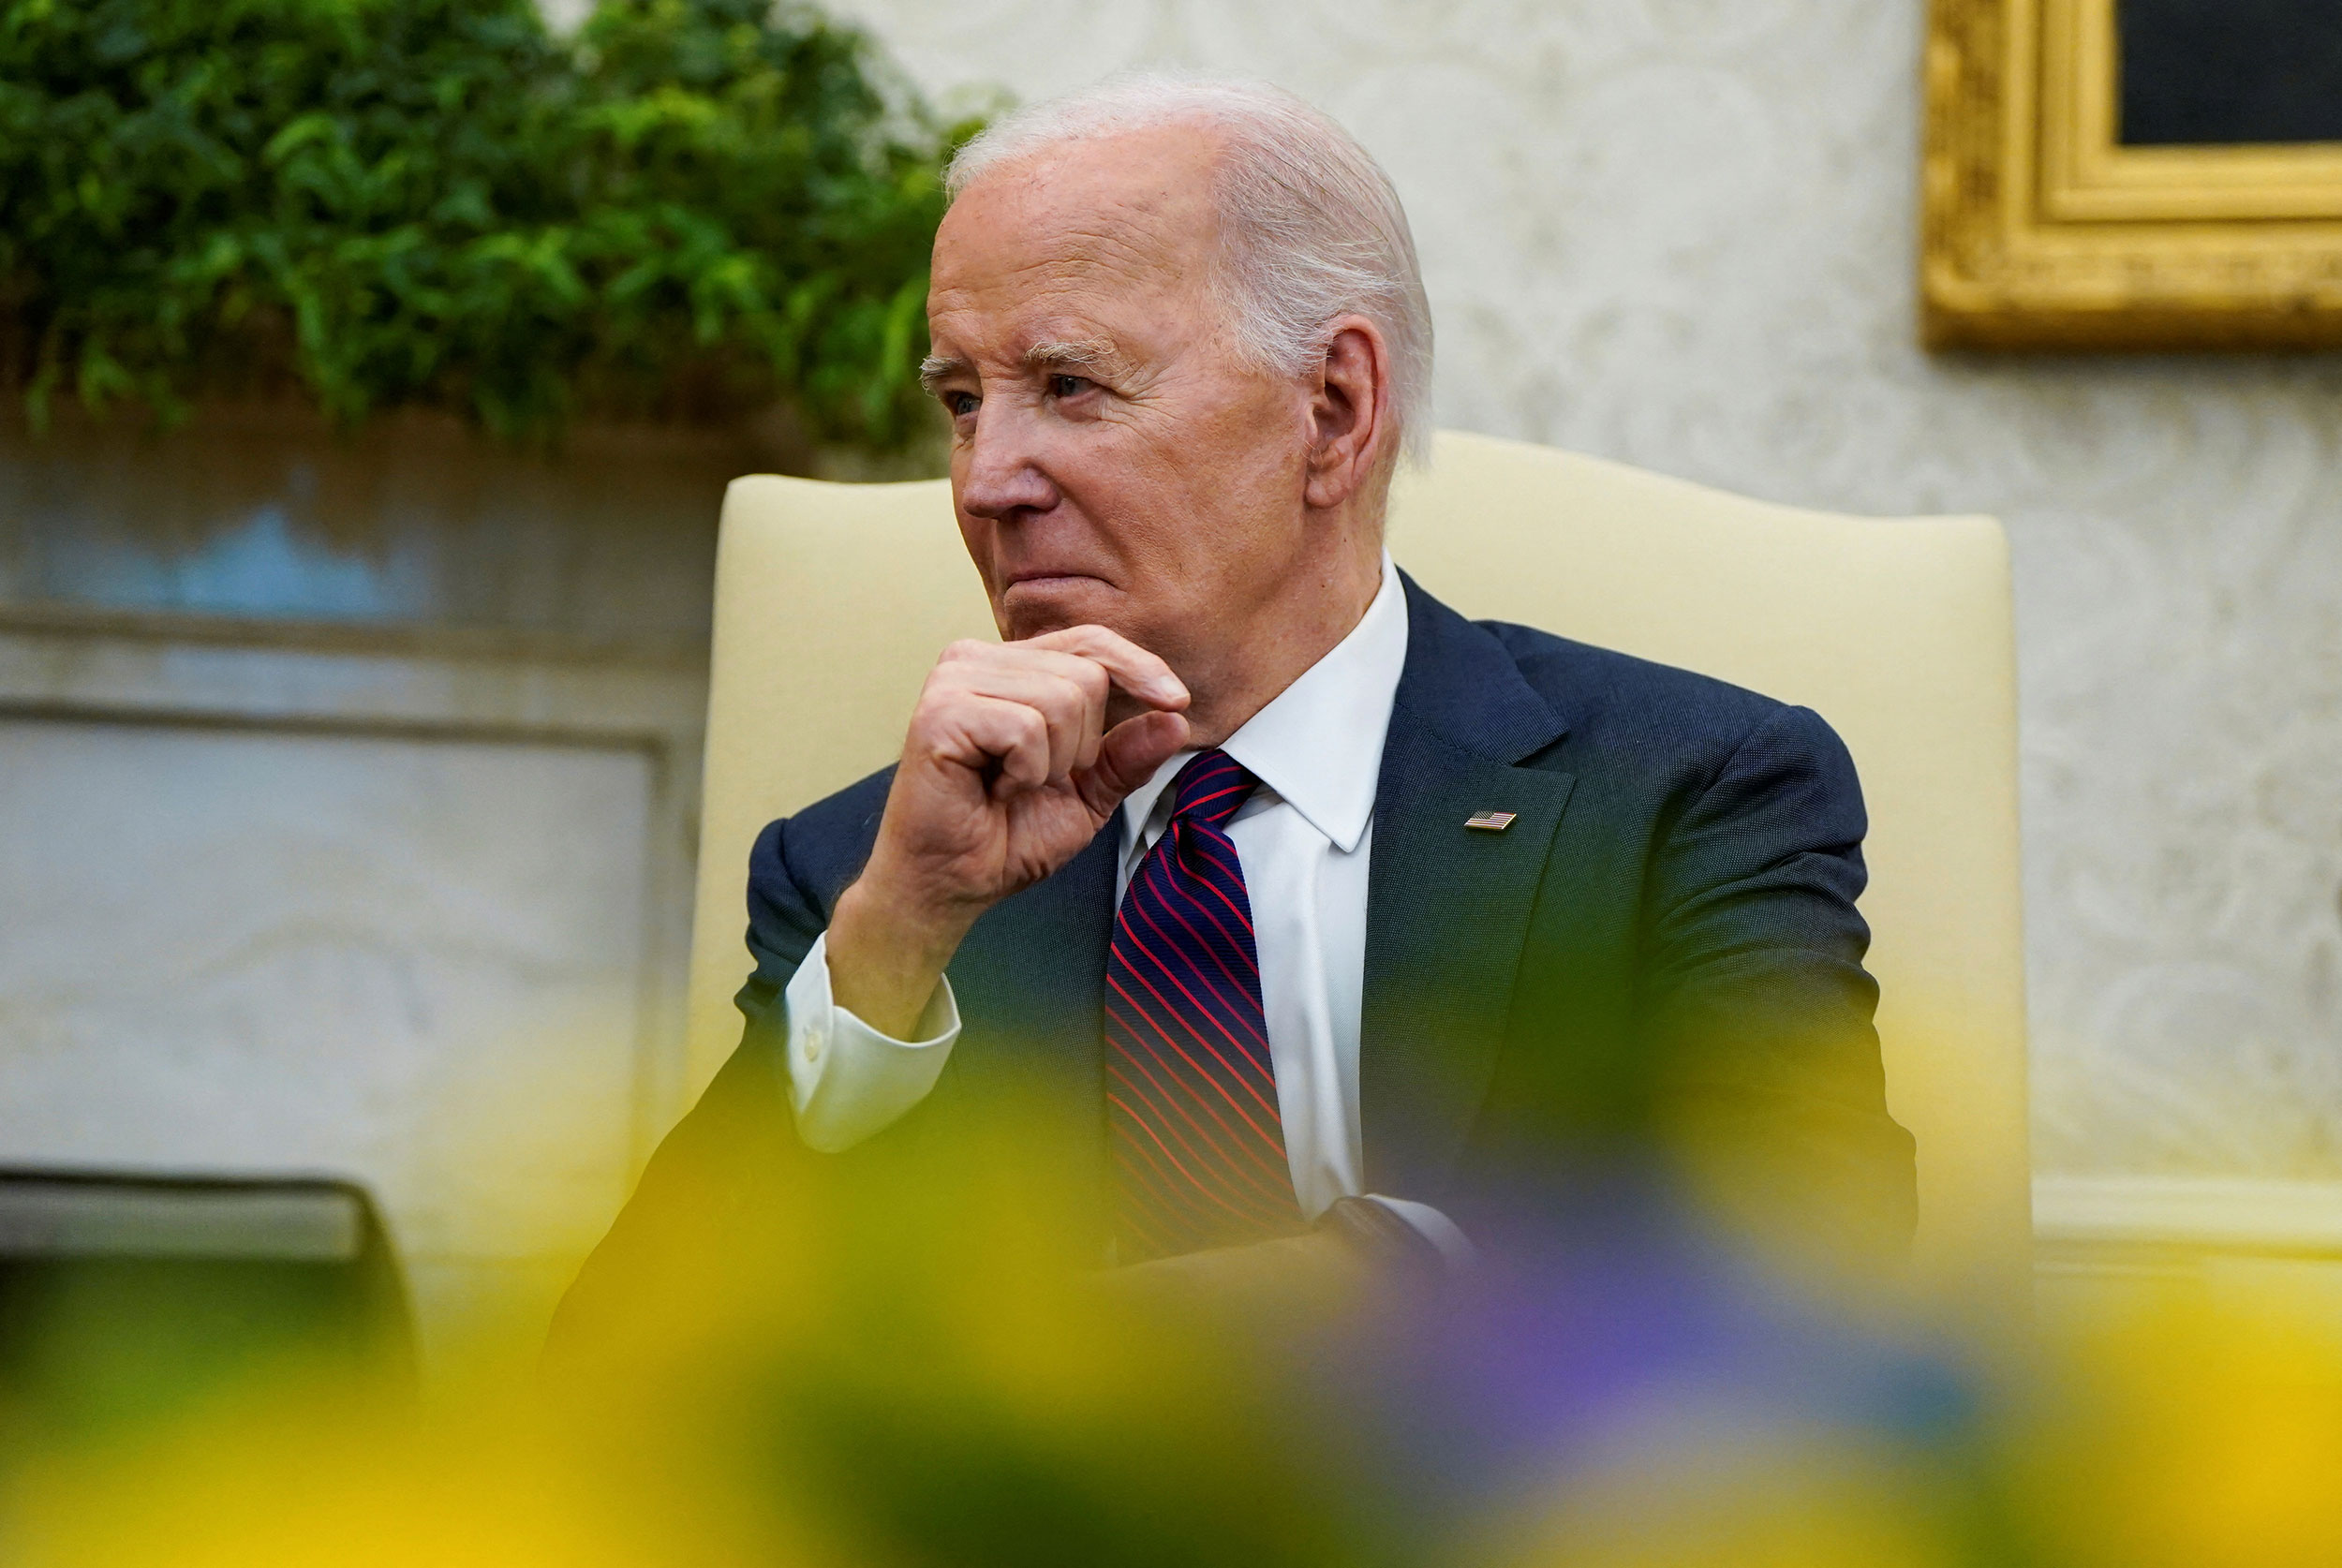 President Joe Biden meets with Czech Prime Minister Petr Fiala in the Oval Office at the White House on April 15.